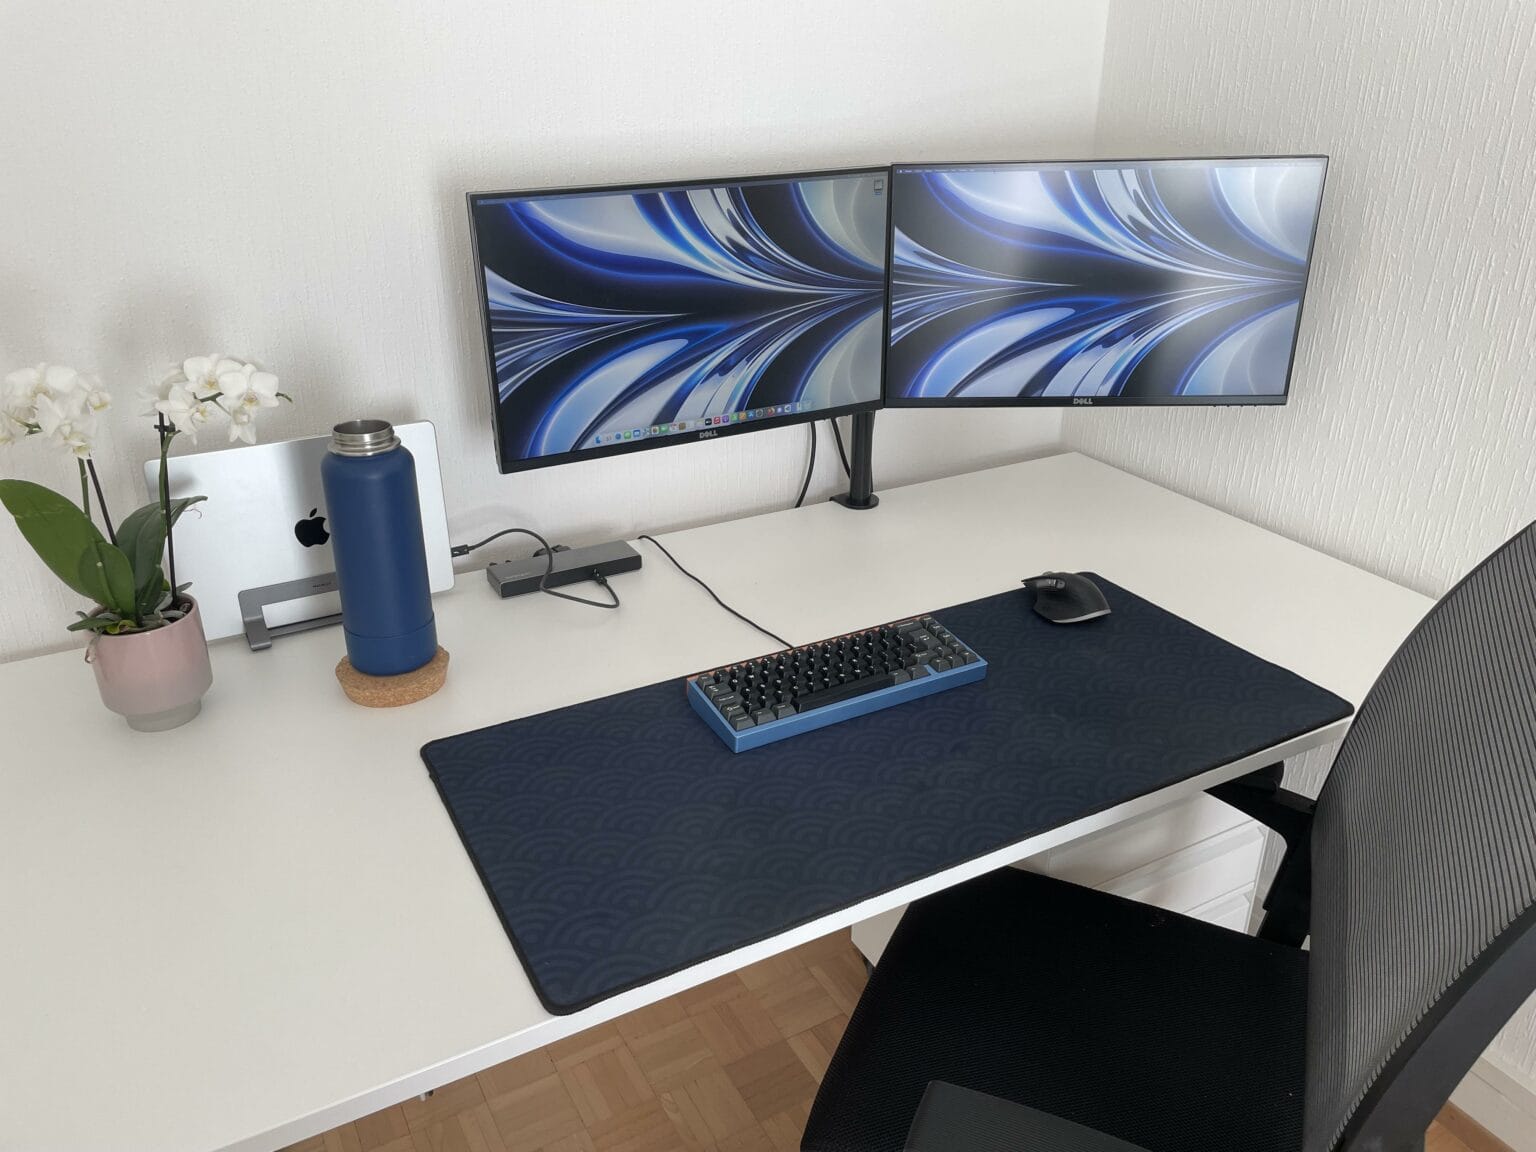 See the cables? It's pretty easy to neaten those up by putting the dock under the desk.